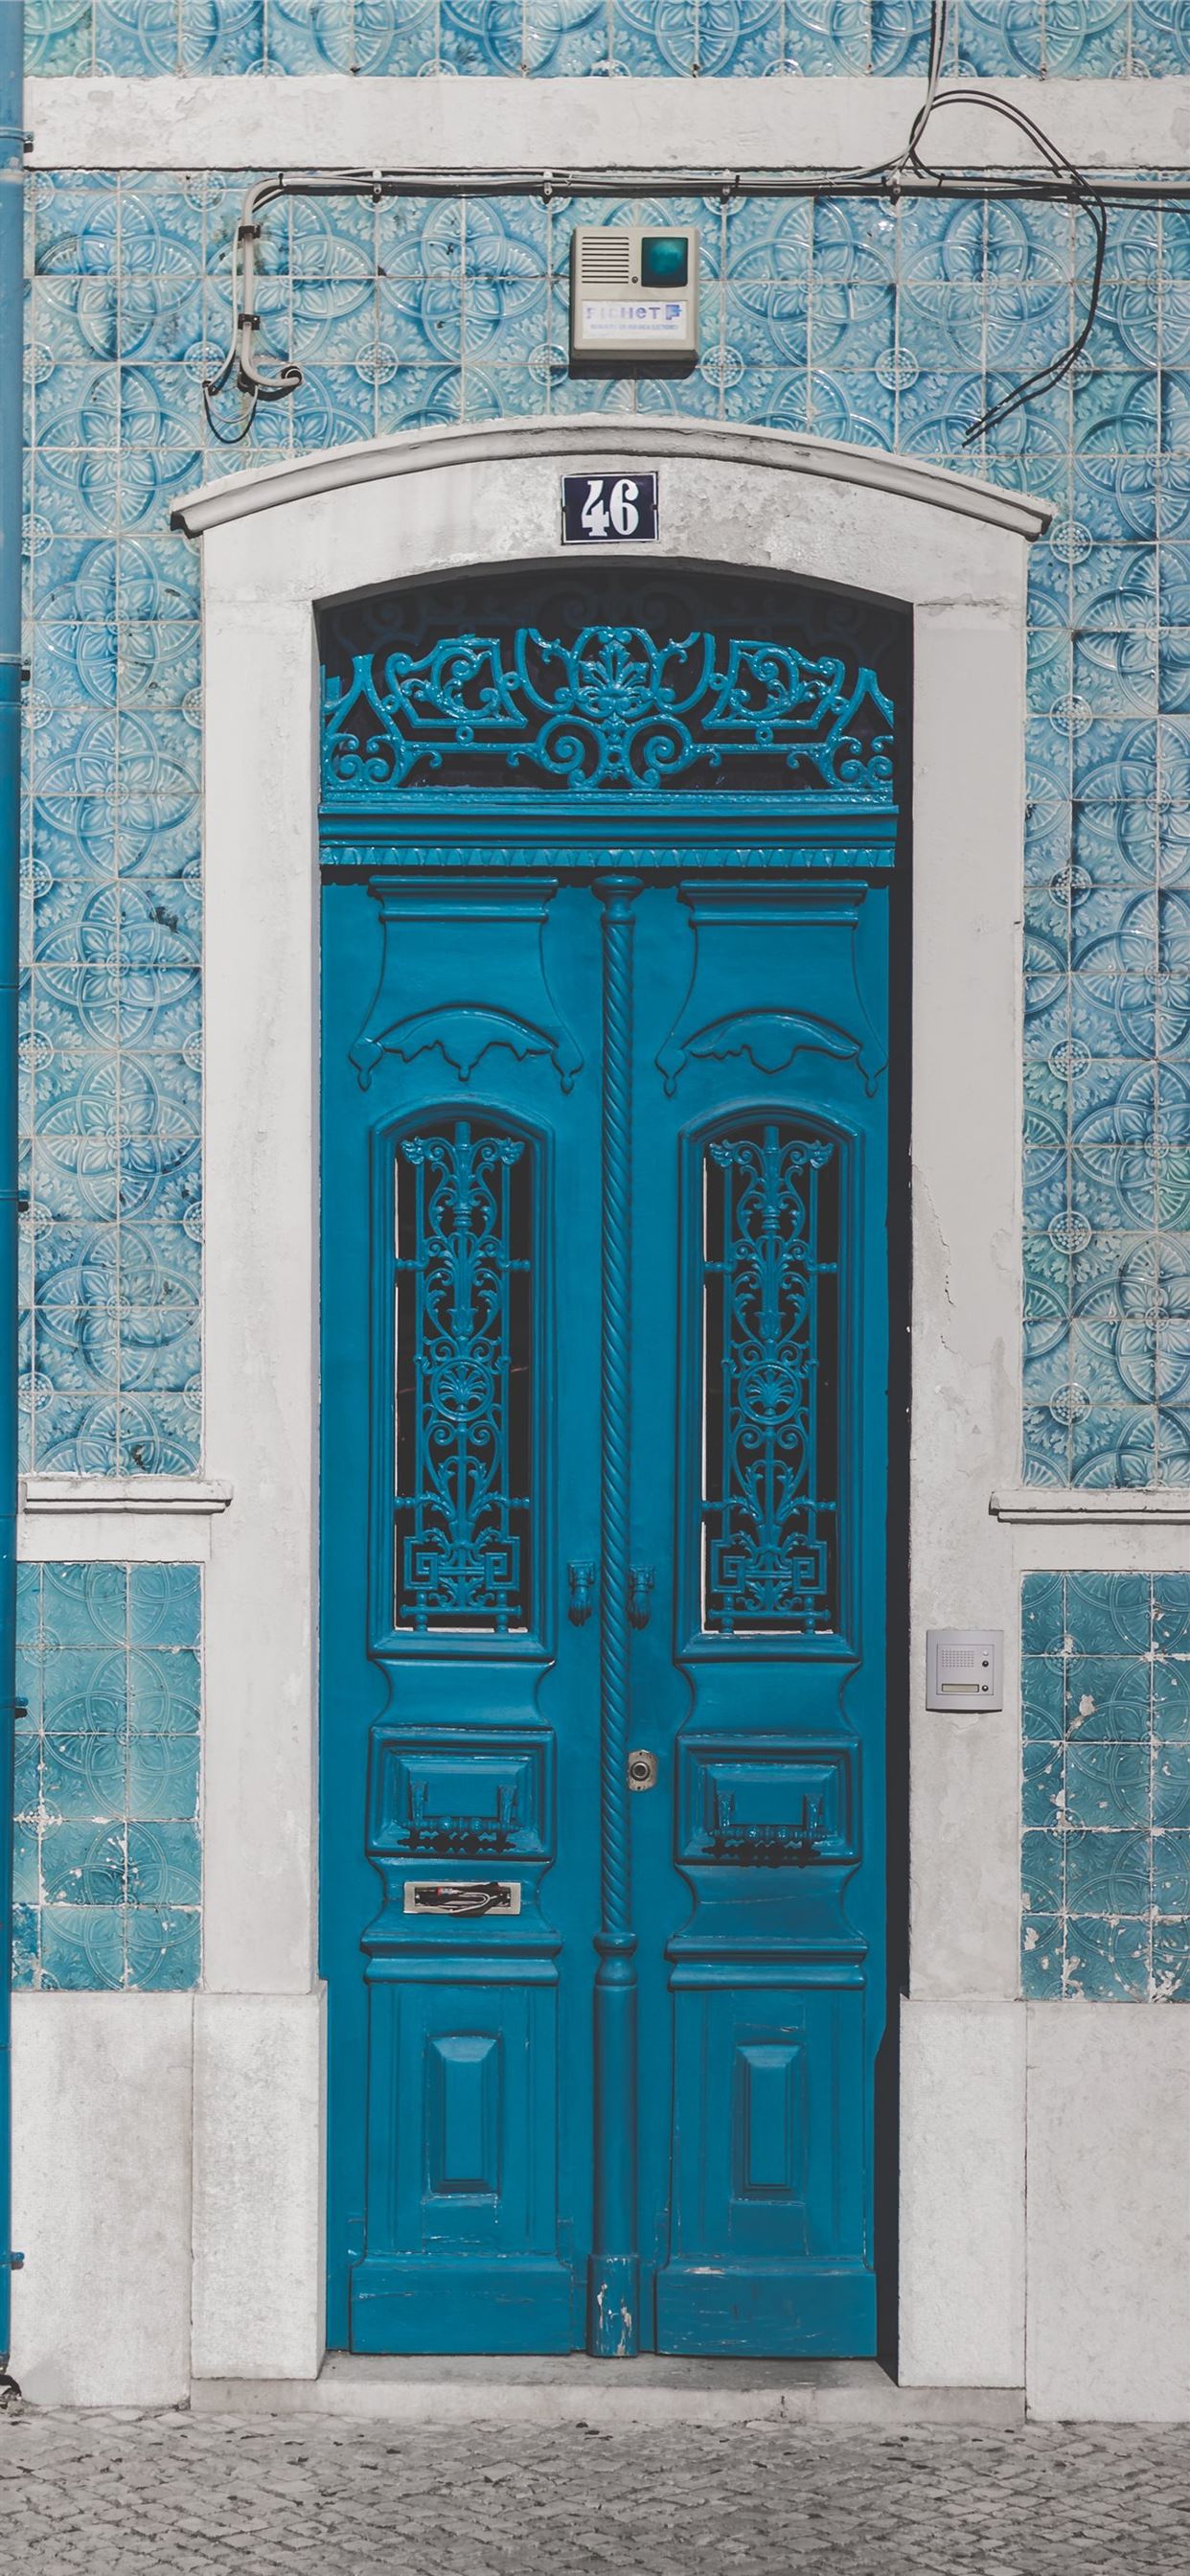 blue wooden door closed with 46 sign iPhone X Wallpaper Free Download